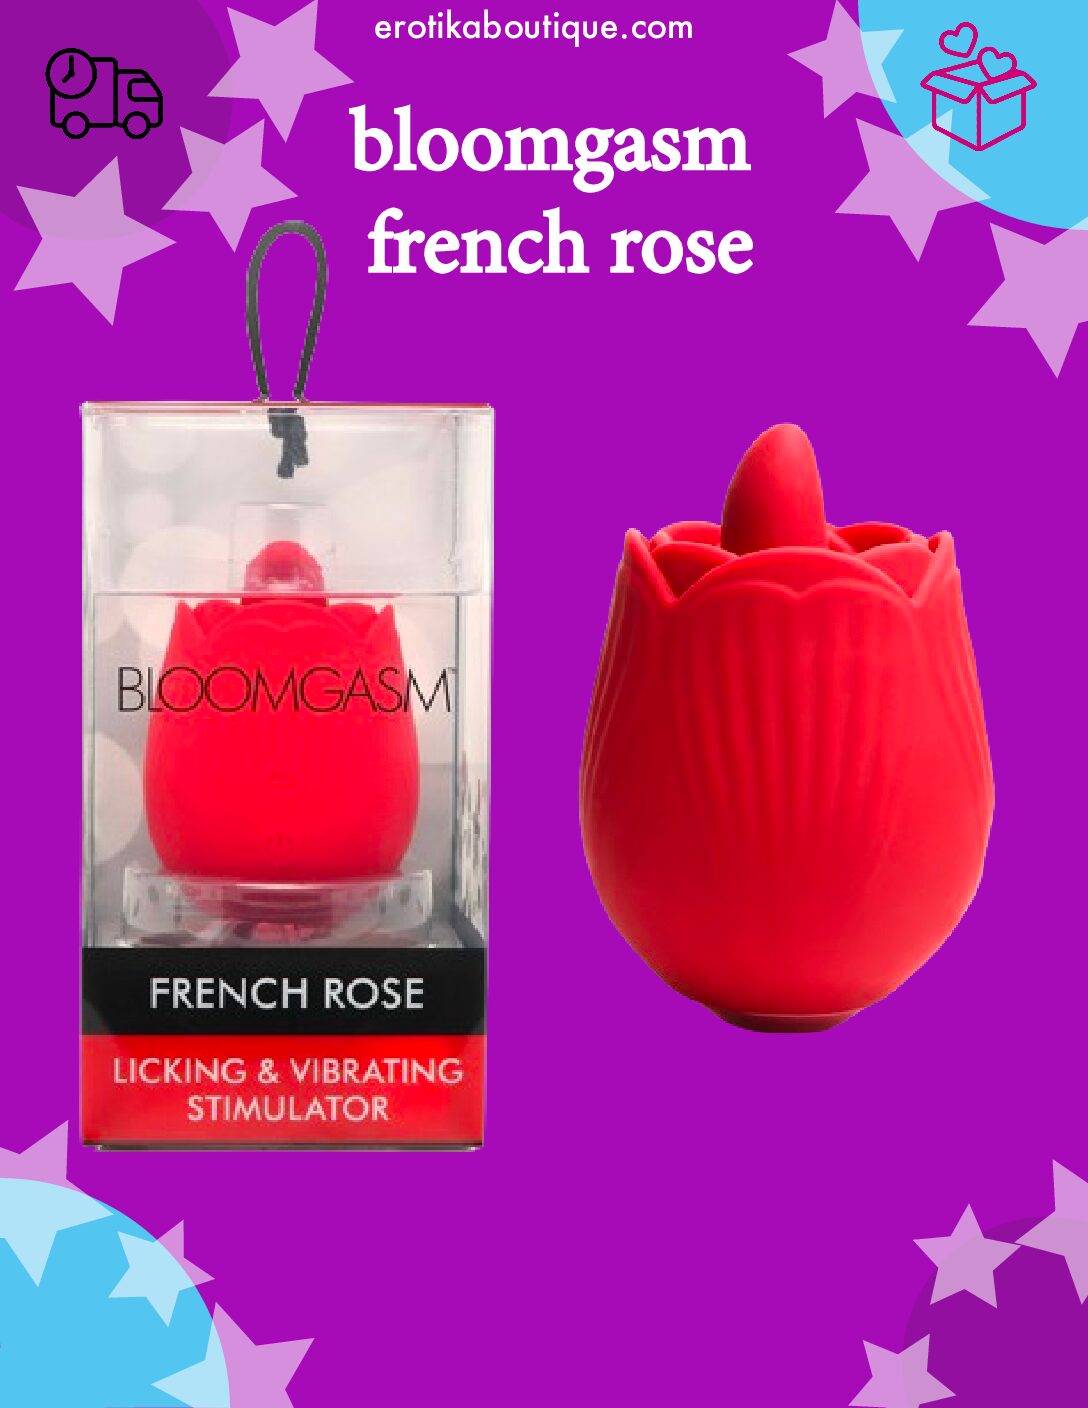 Bloomgasm french rose